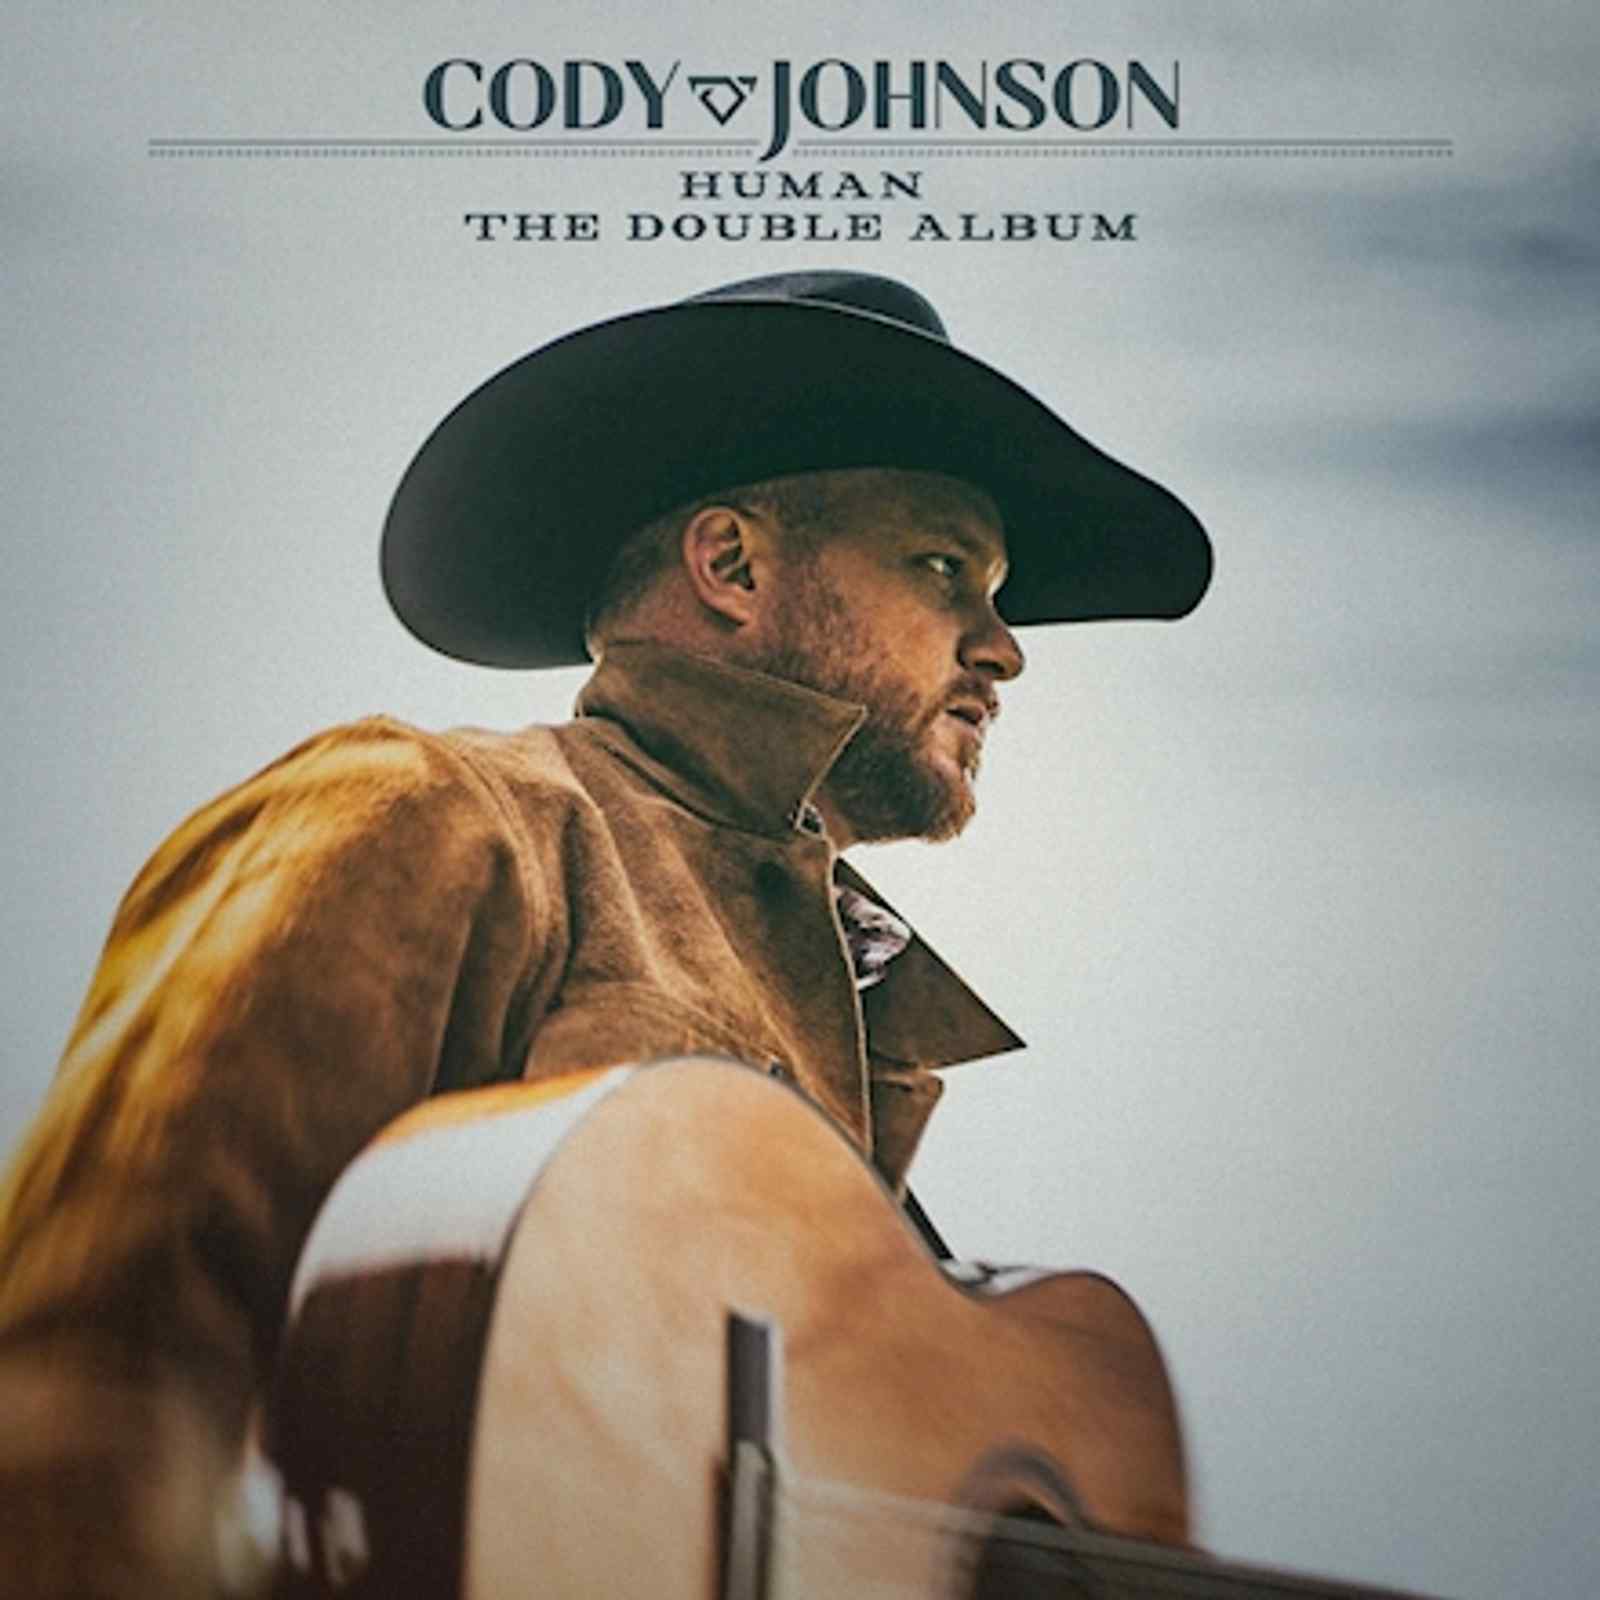 Human The Double Album by Cody Johnson